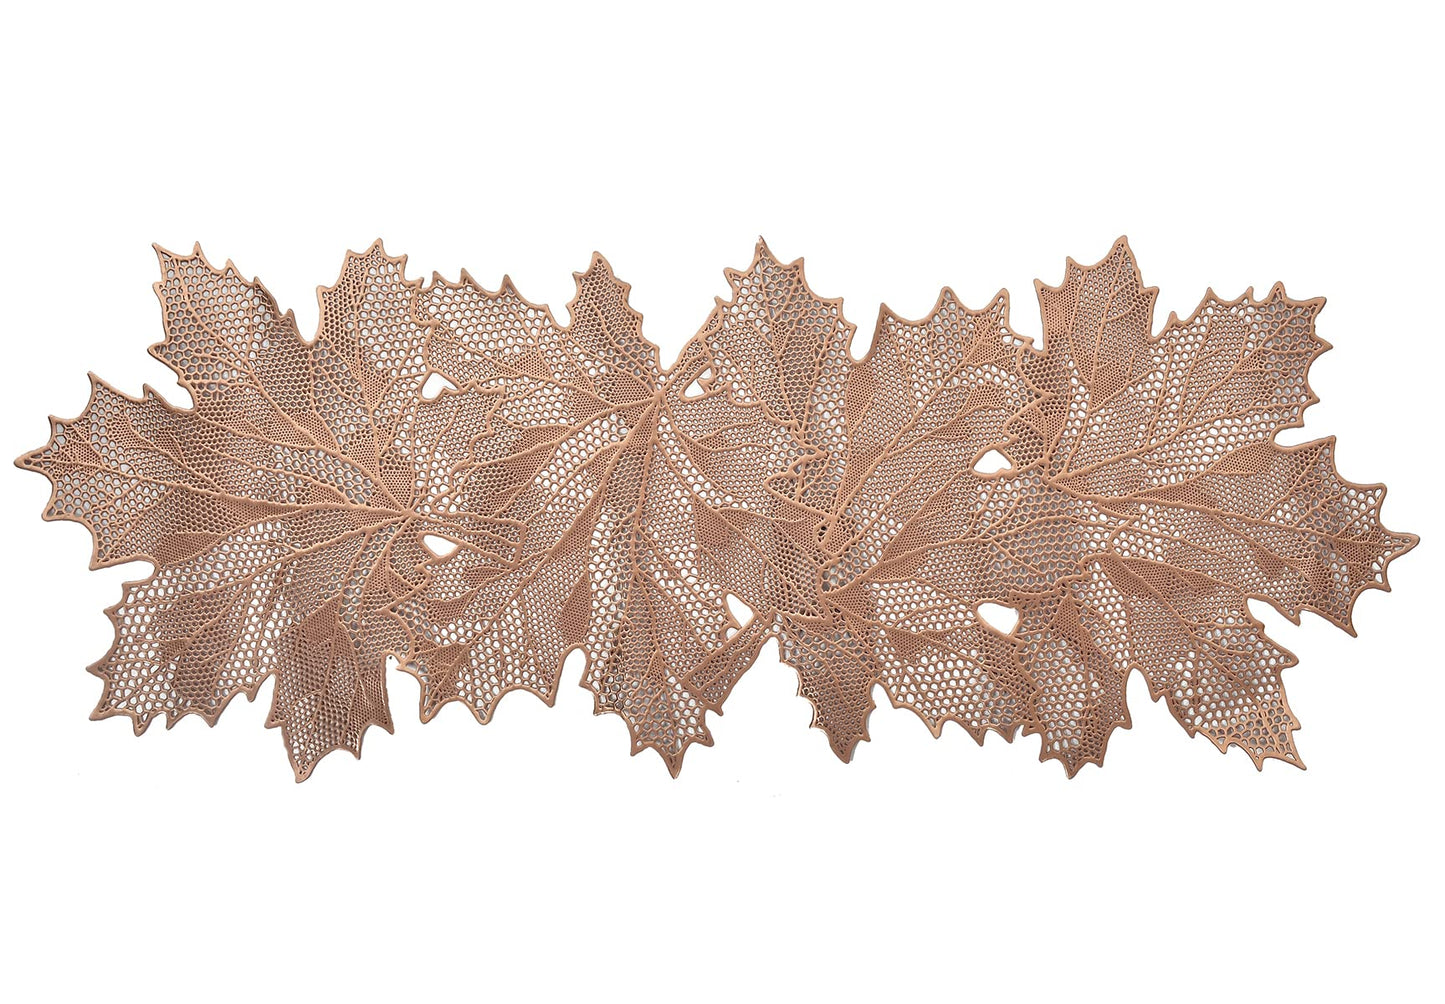 Heart Home Leaf Design Soft Leather Table Runner for Patios Family Dinner Office Kitchen Table Copper-HS43HEARTH26605 Standard